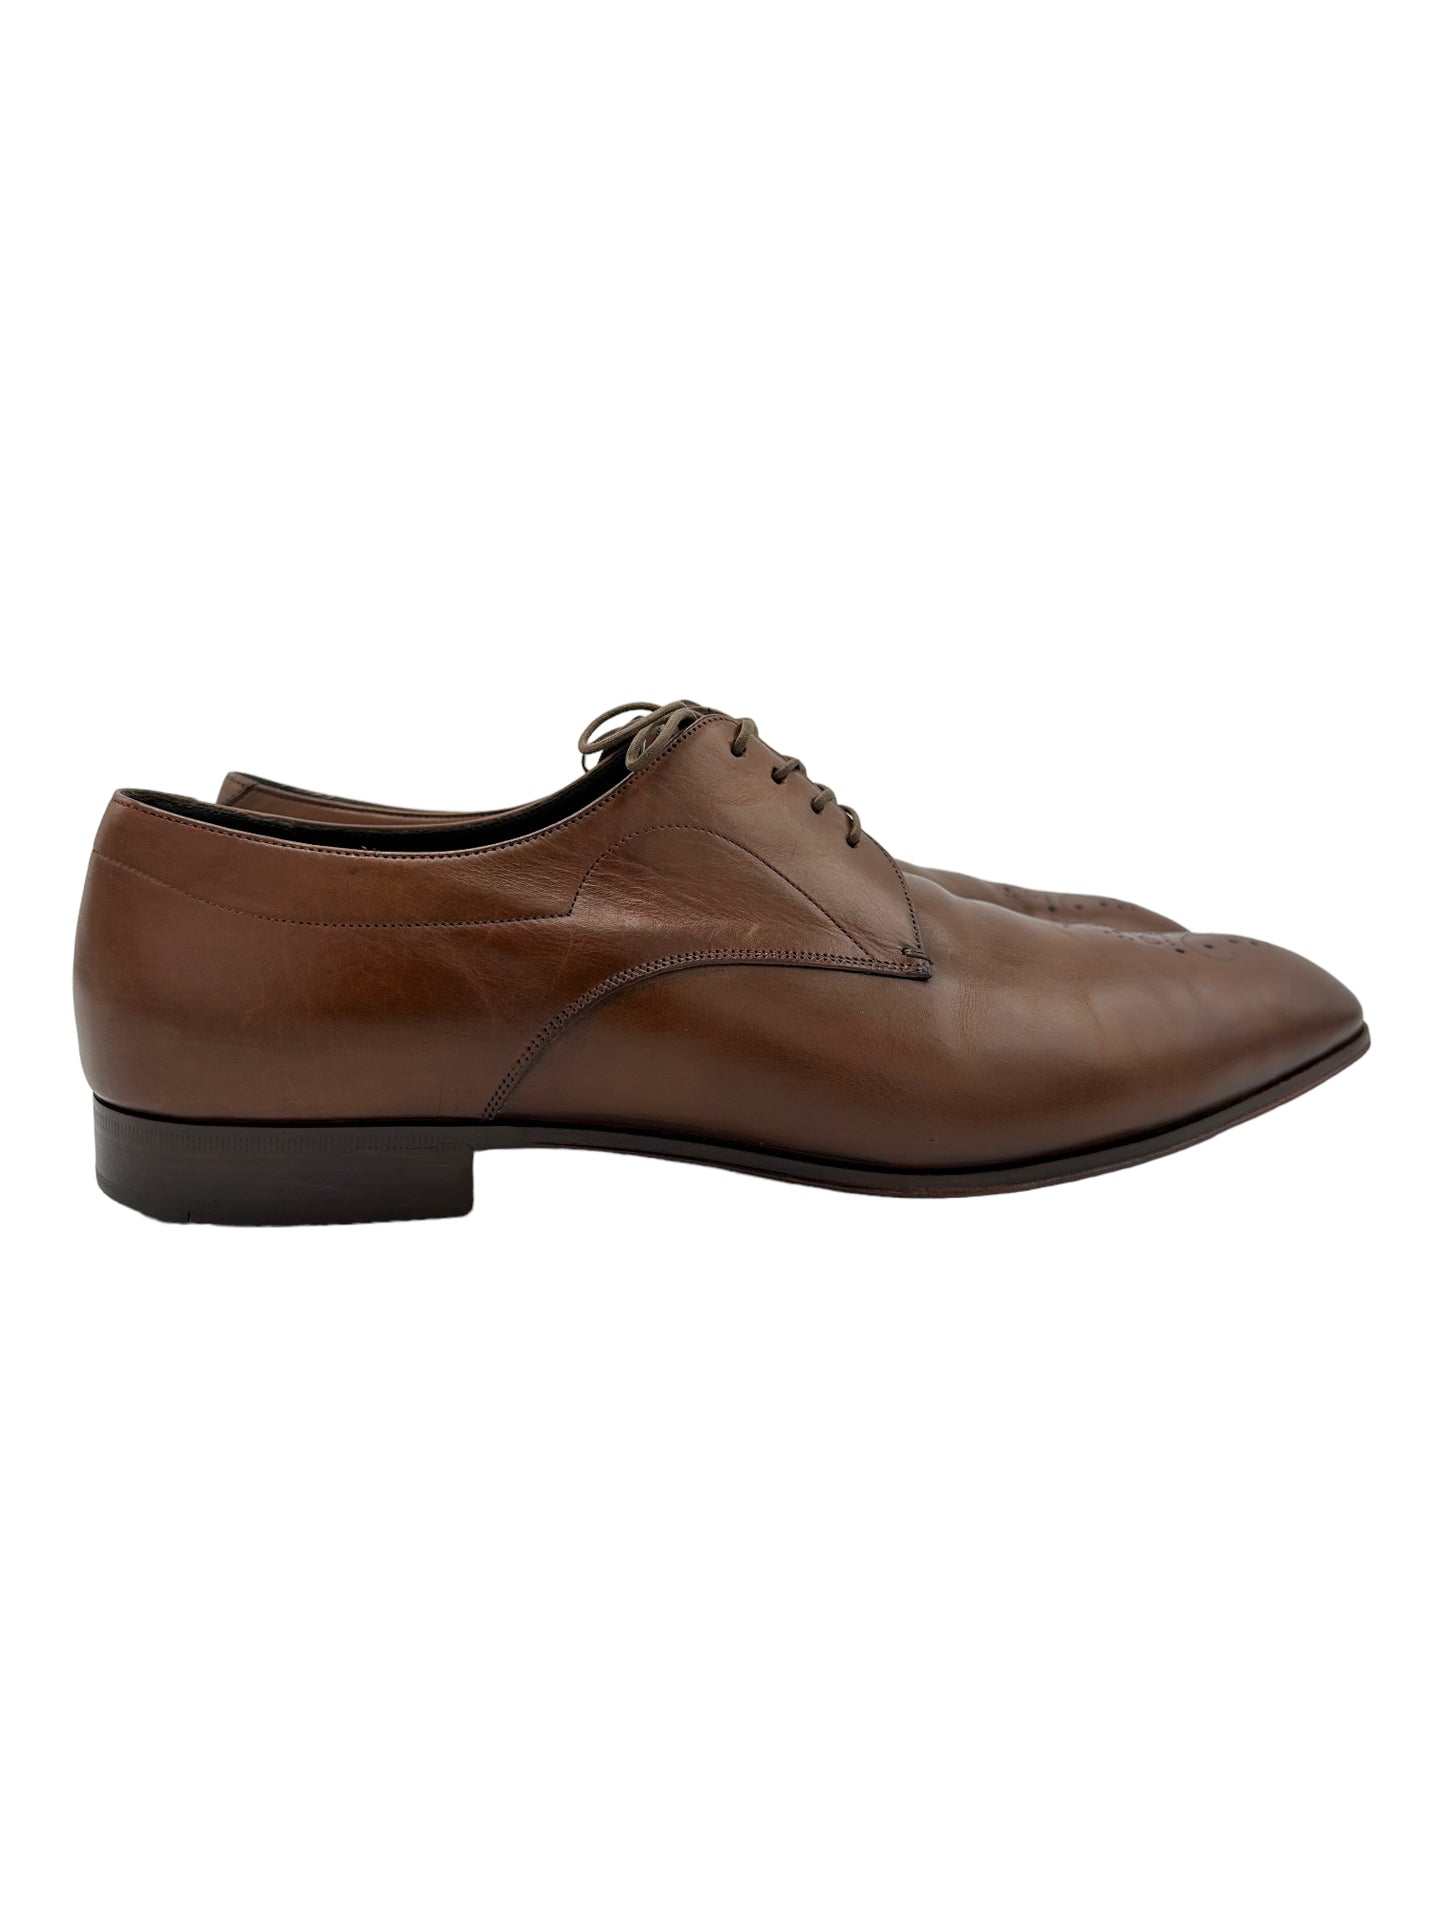 Prada Brown Leather Derby Dress Shoes